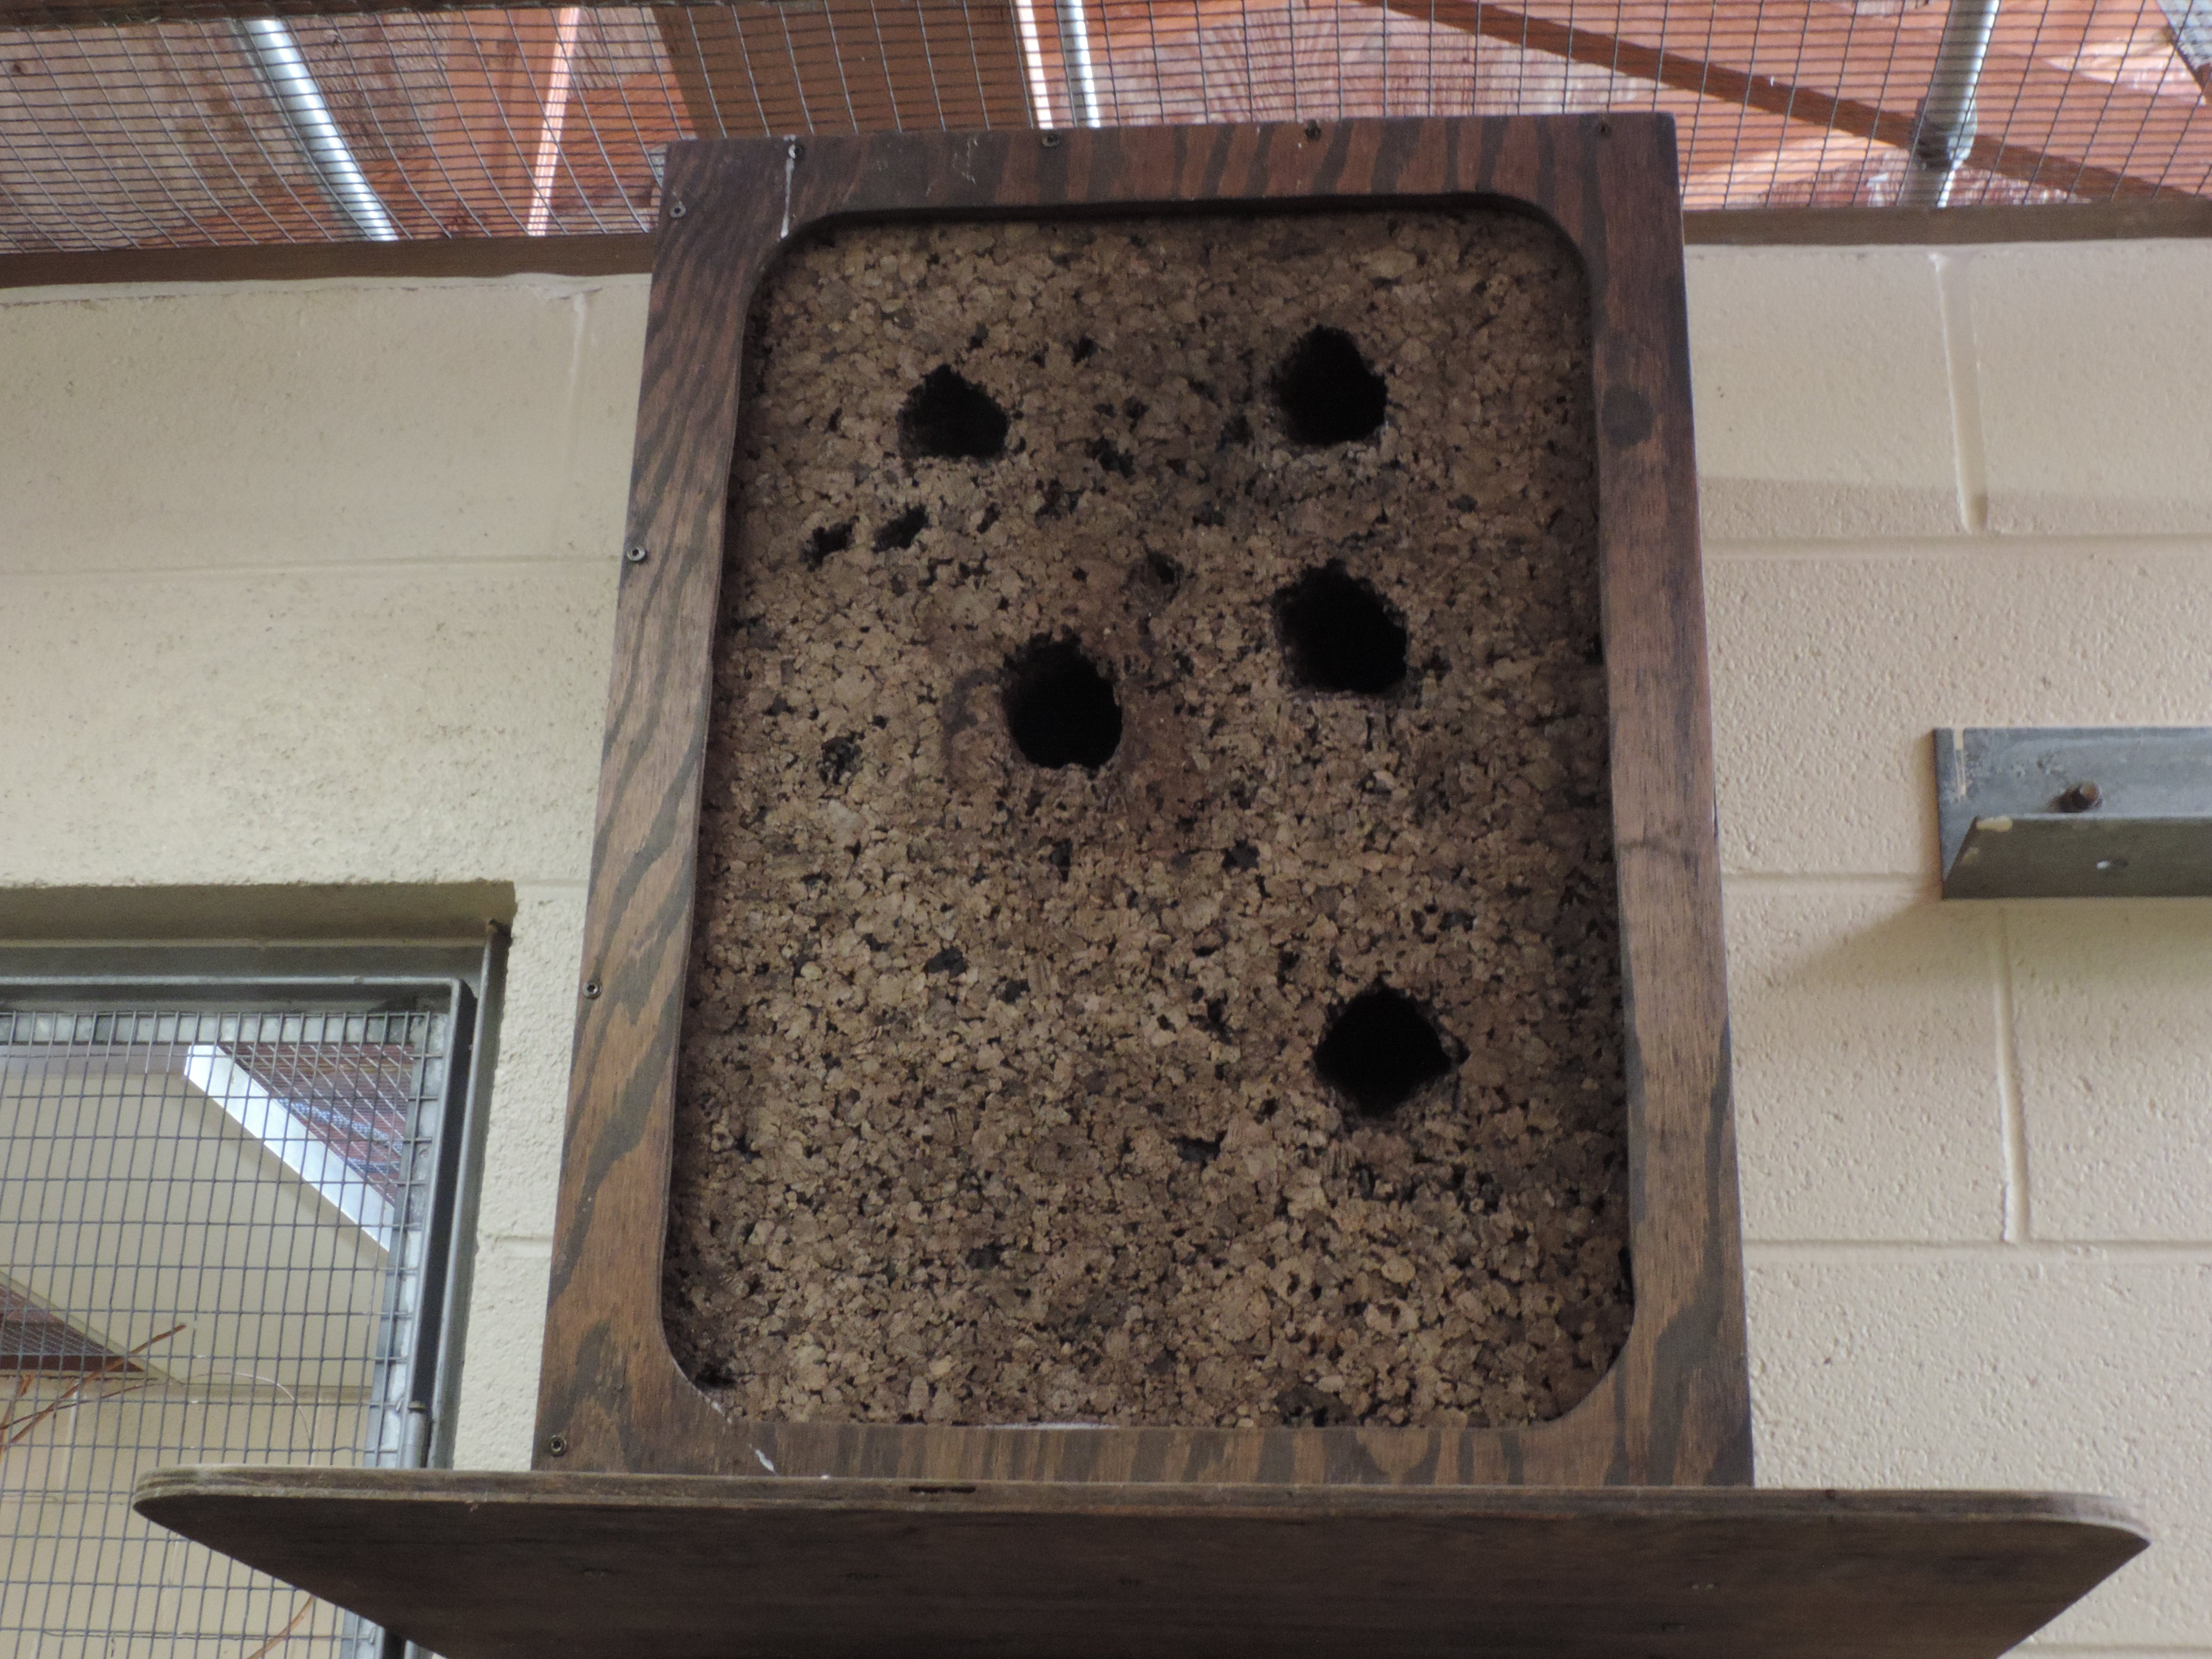 A wooden-framed cork nest box with five holes where Guam kingfishers have excavated nesting sites.